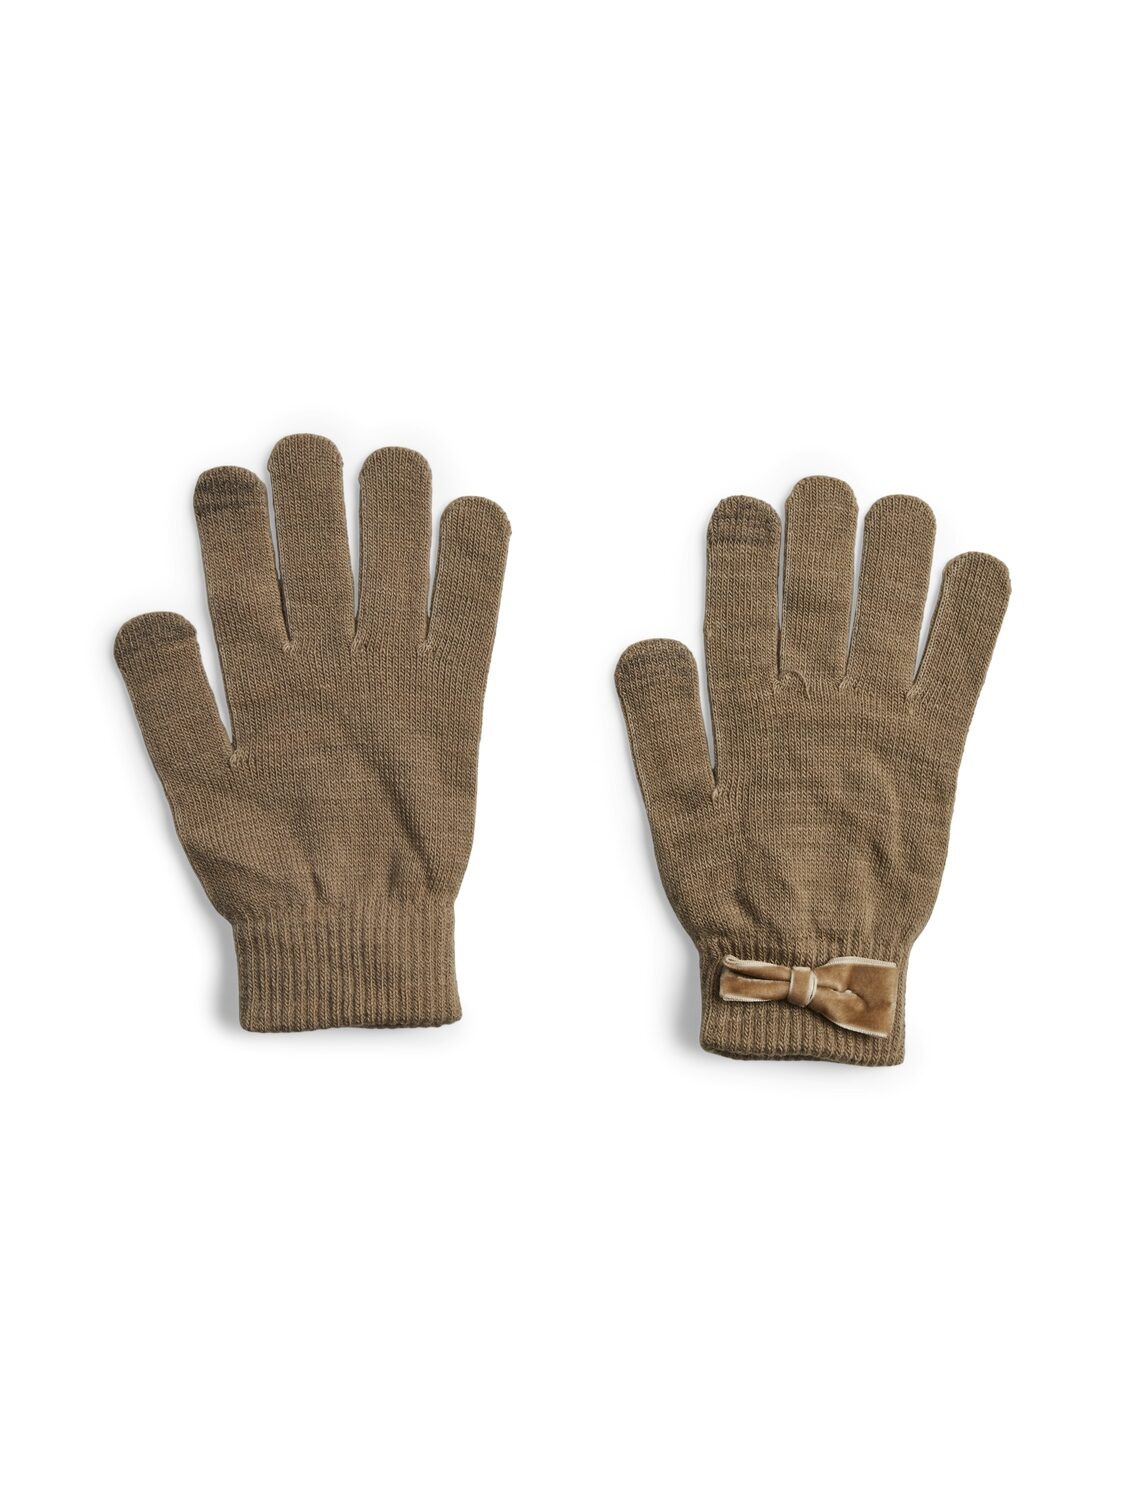 Buddy Bow Smart Gloves- Natural